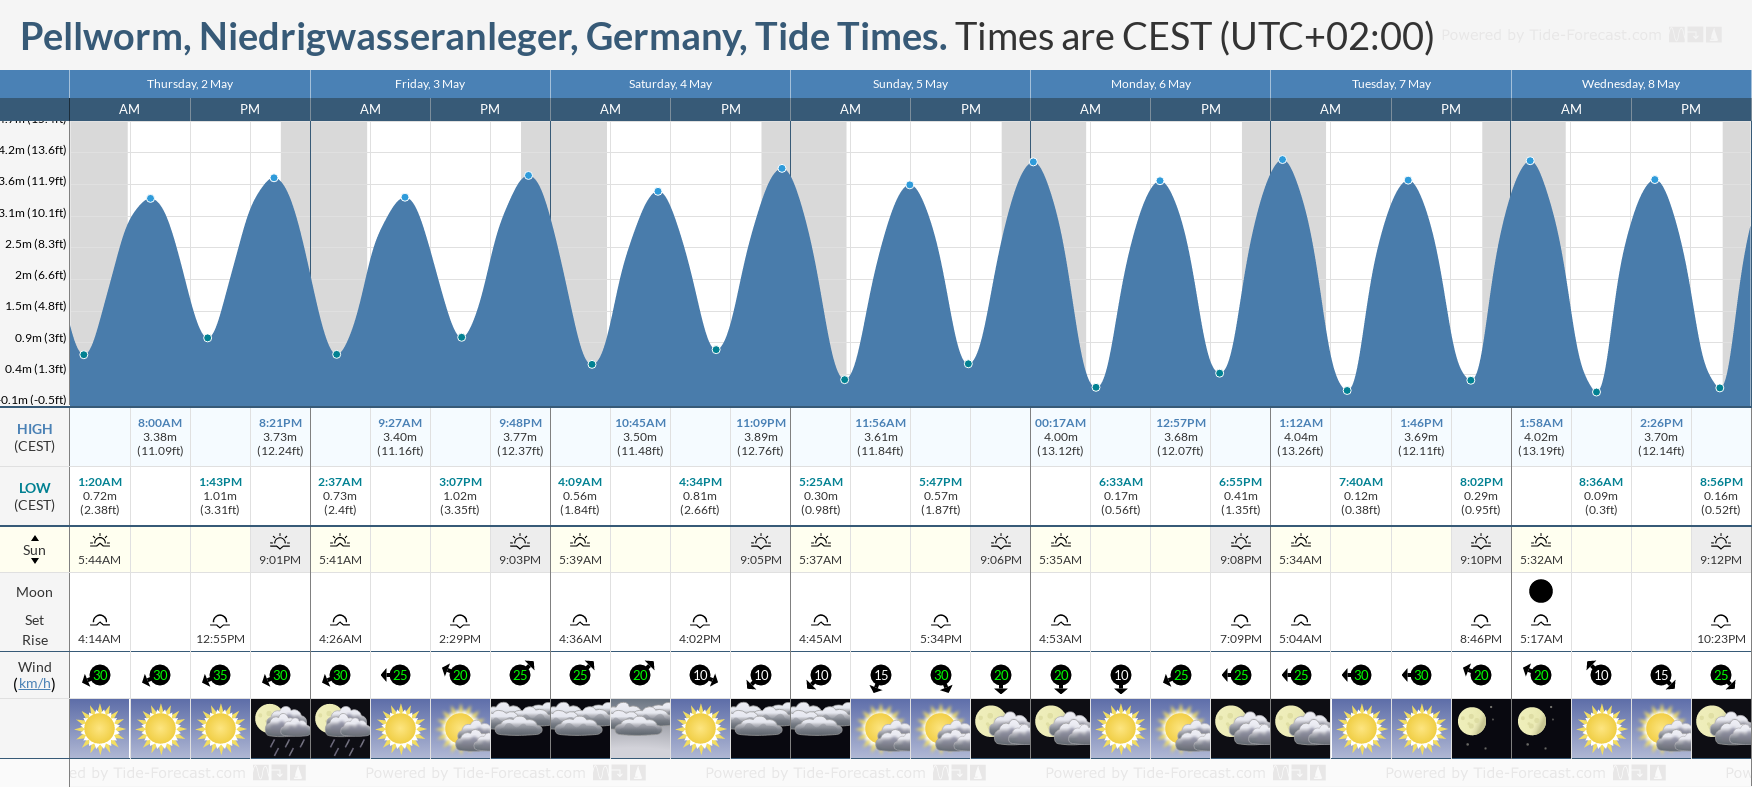 Pellworm, Niedrigwasseranleger, Germany Tide Chart including high and low tide tide times for the next 7 days